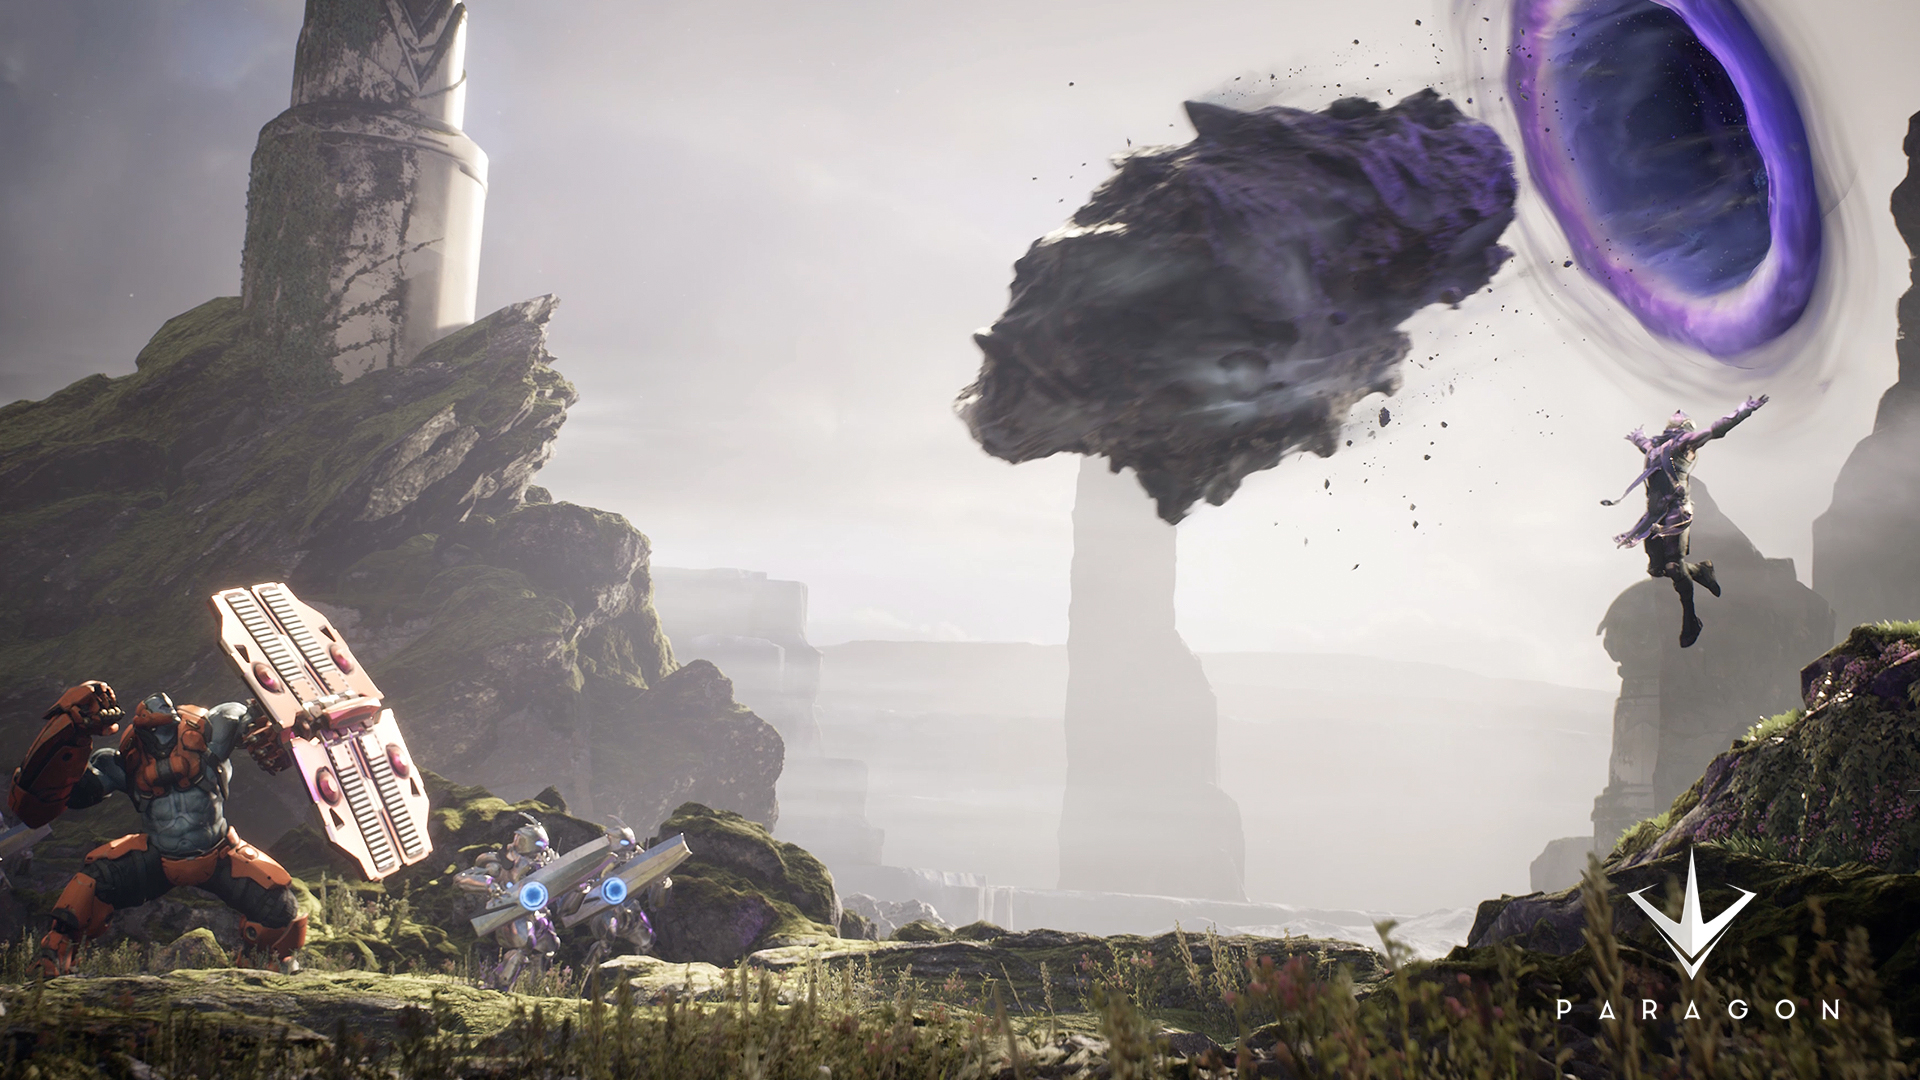 Epic sues gamer over creation of 'world's most powerful' Paragon